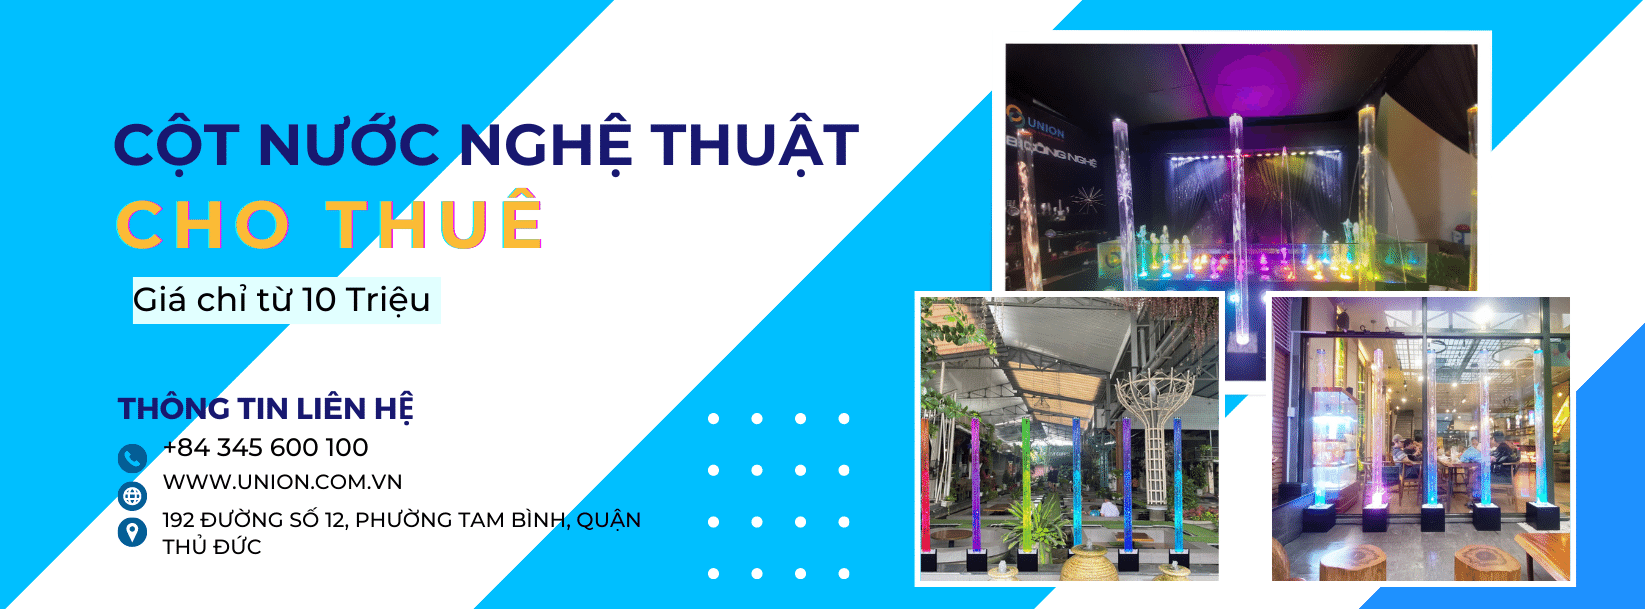 cho thue cot nuoc nghe thuat